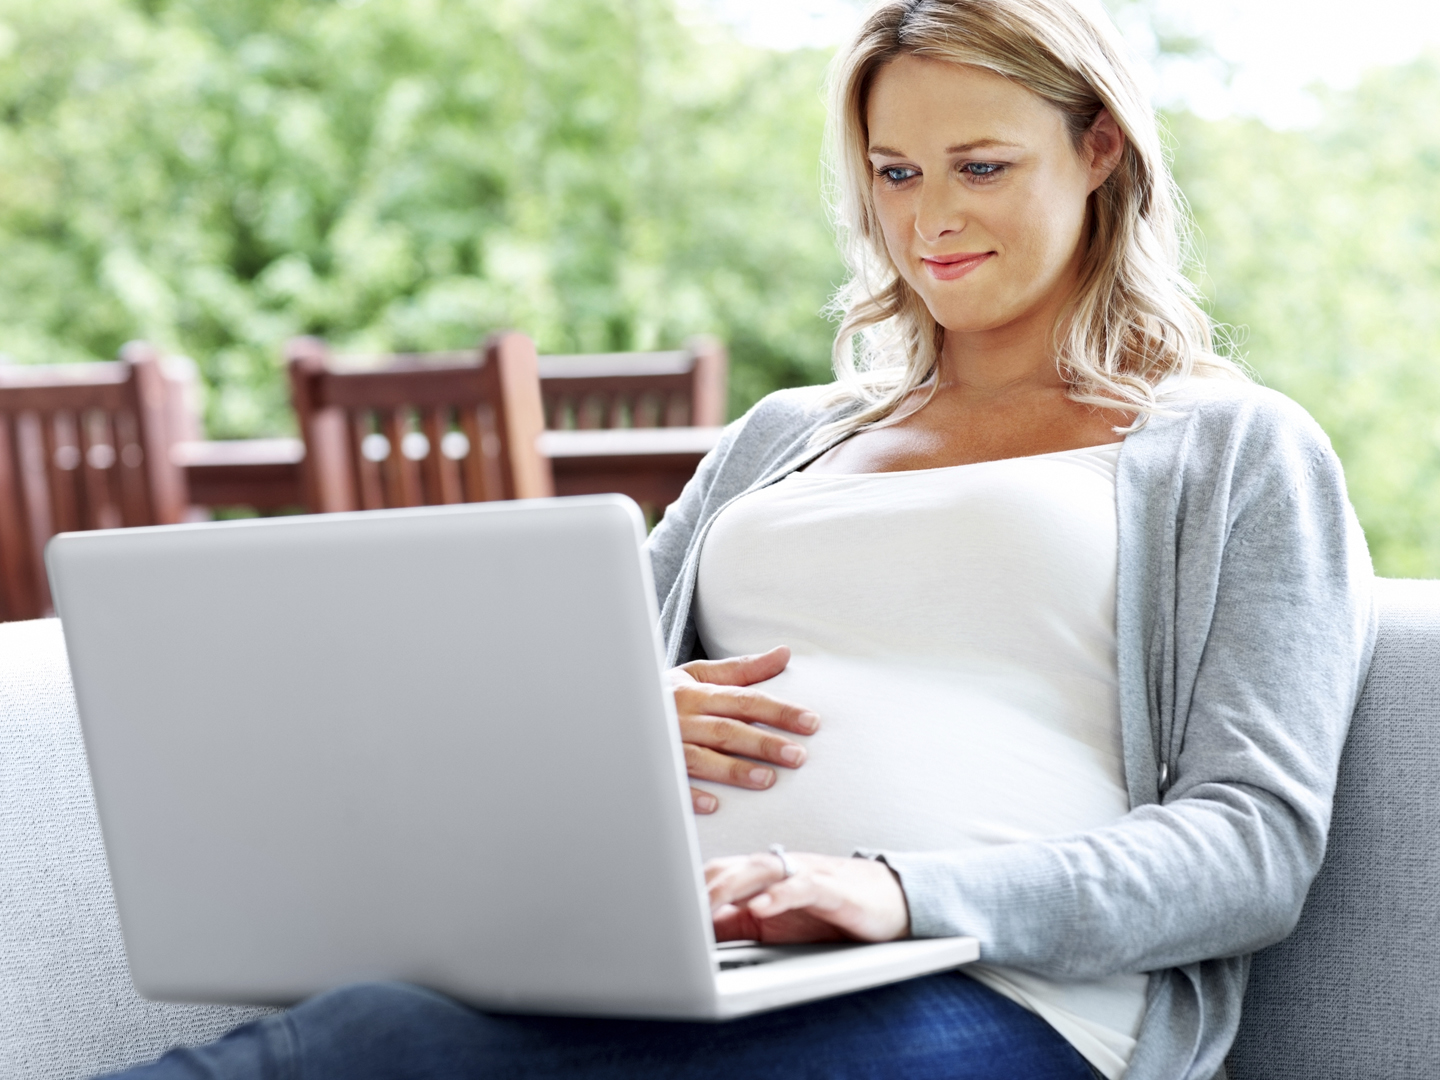 Portrait of pregnant woman working on laptop while relaxing on couch